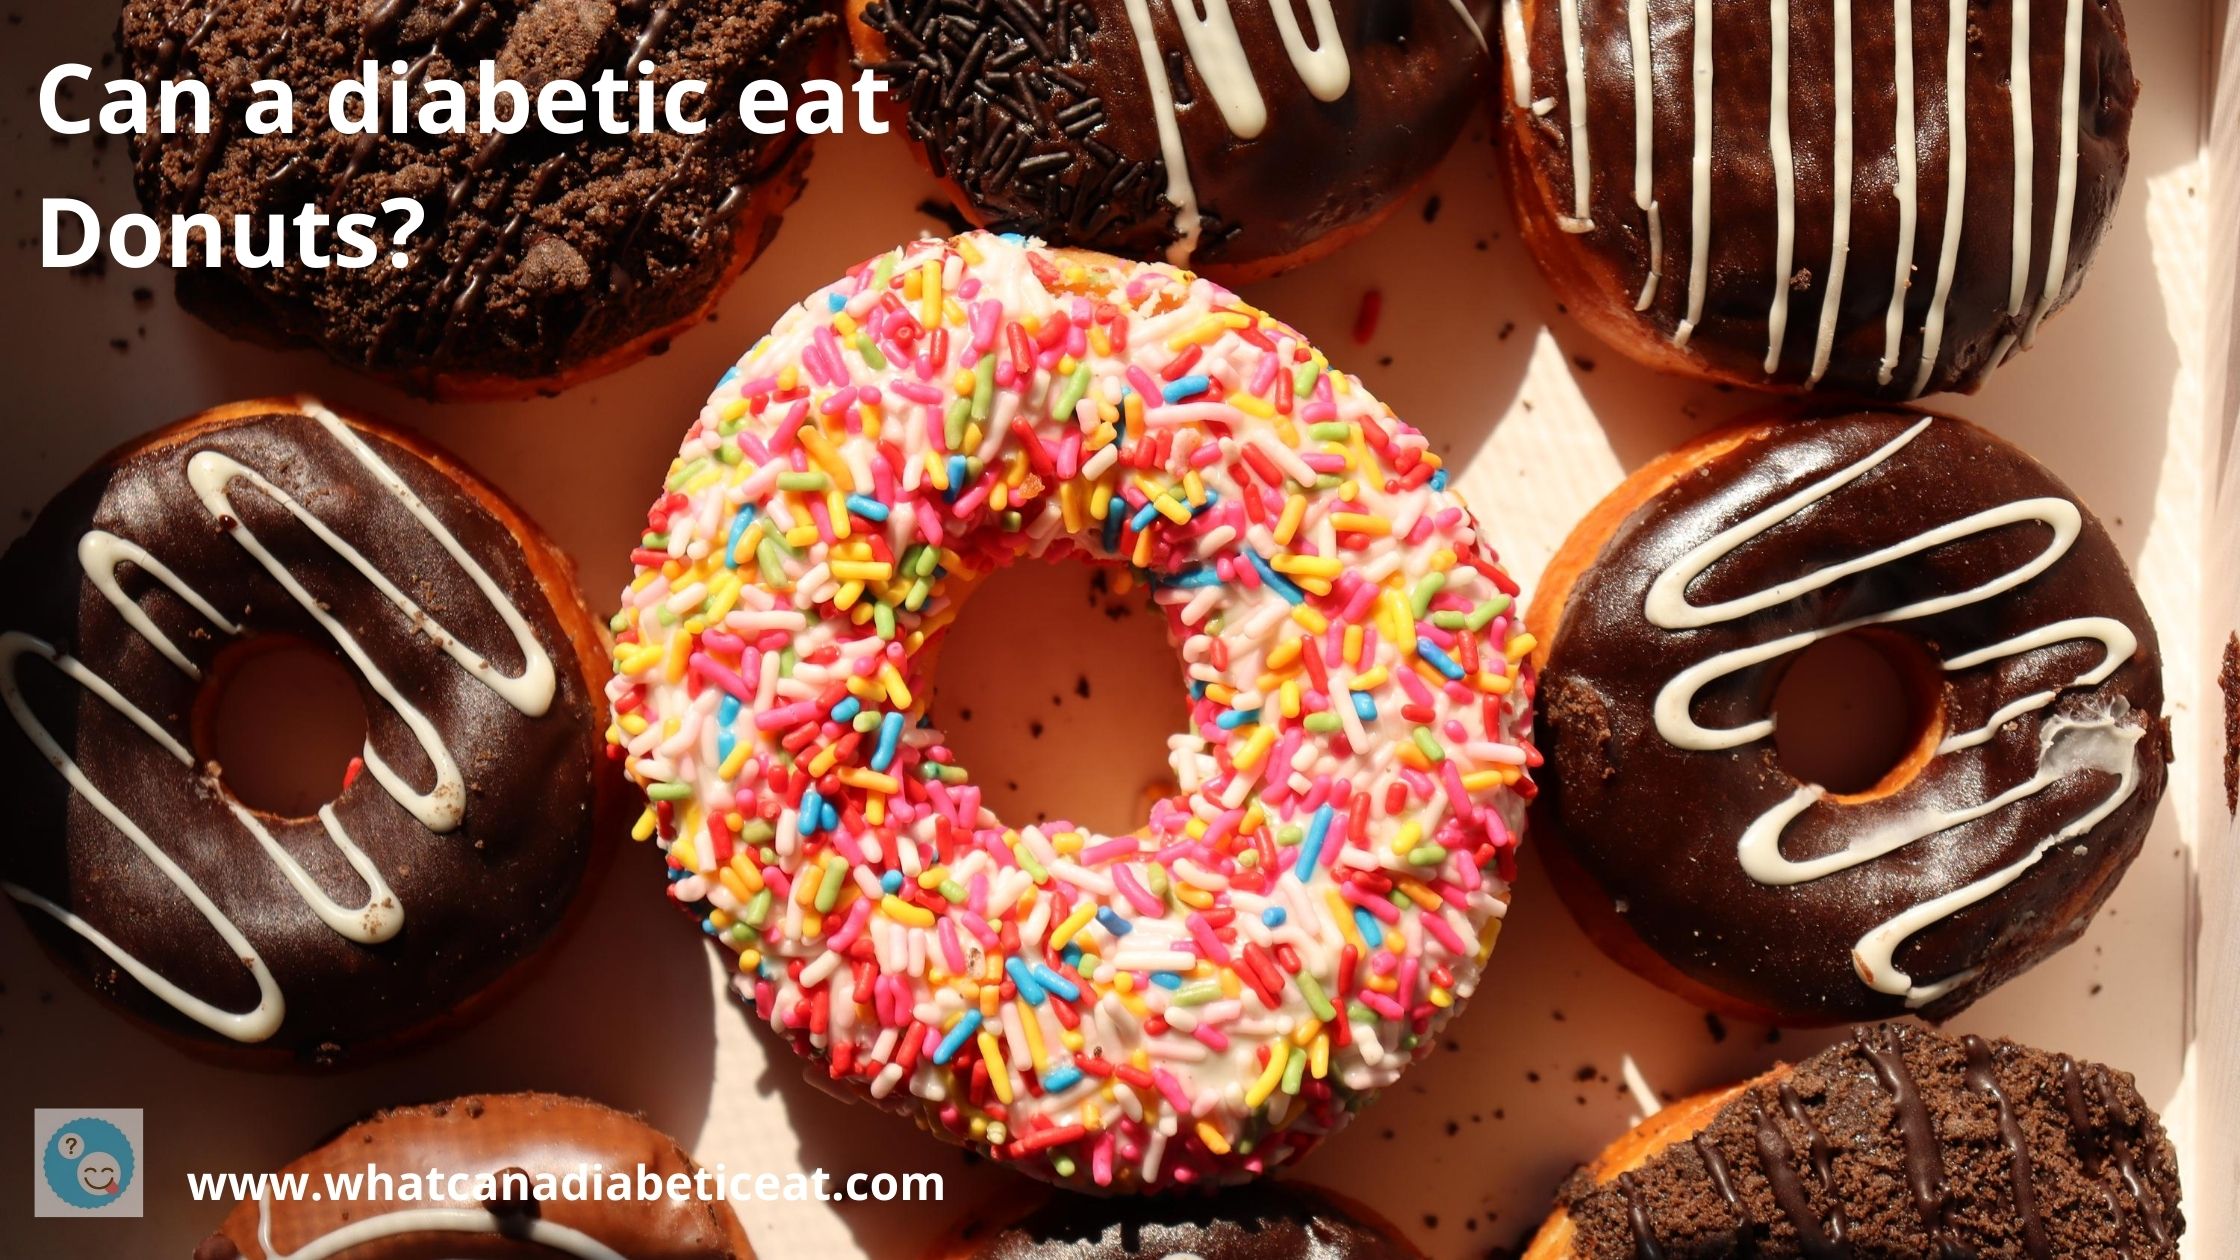 Can a diabetic eat donuts? Why are donuts harmful?